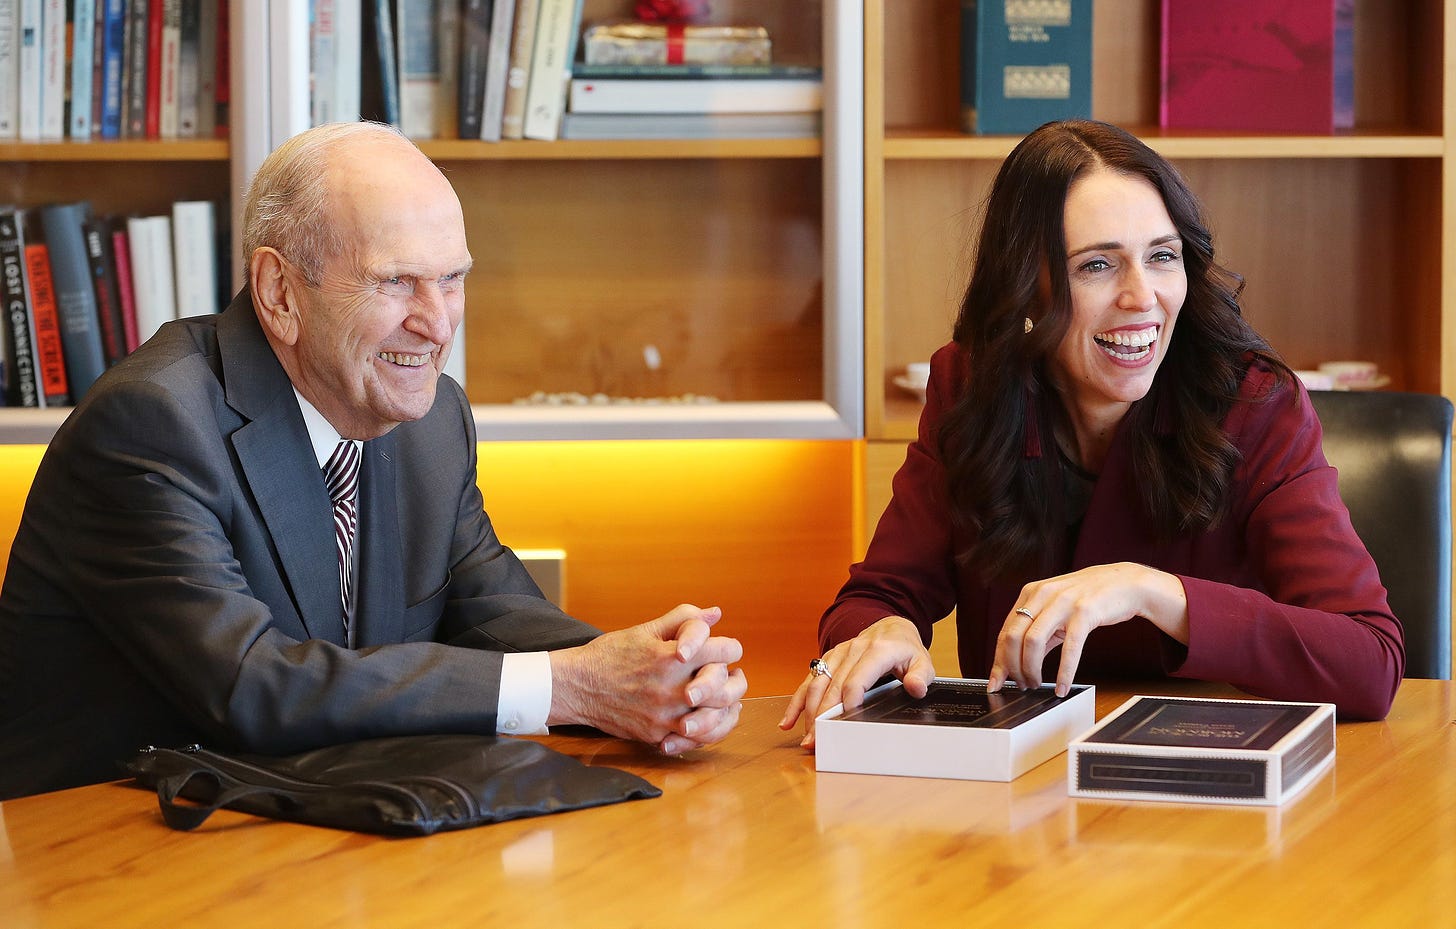 President Russell M. Nelson of The Church of Jesus Christ of Latter-day Saints gives a Book of Mormon to New Zealand Prime Minister Jacinda Ardern in Wellington, New Zealand, on Monday, May 20, 2019.